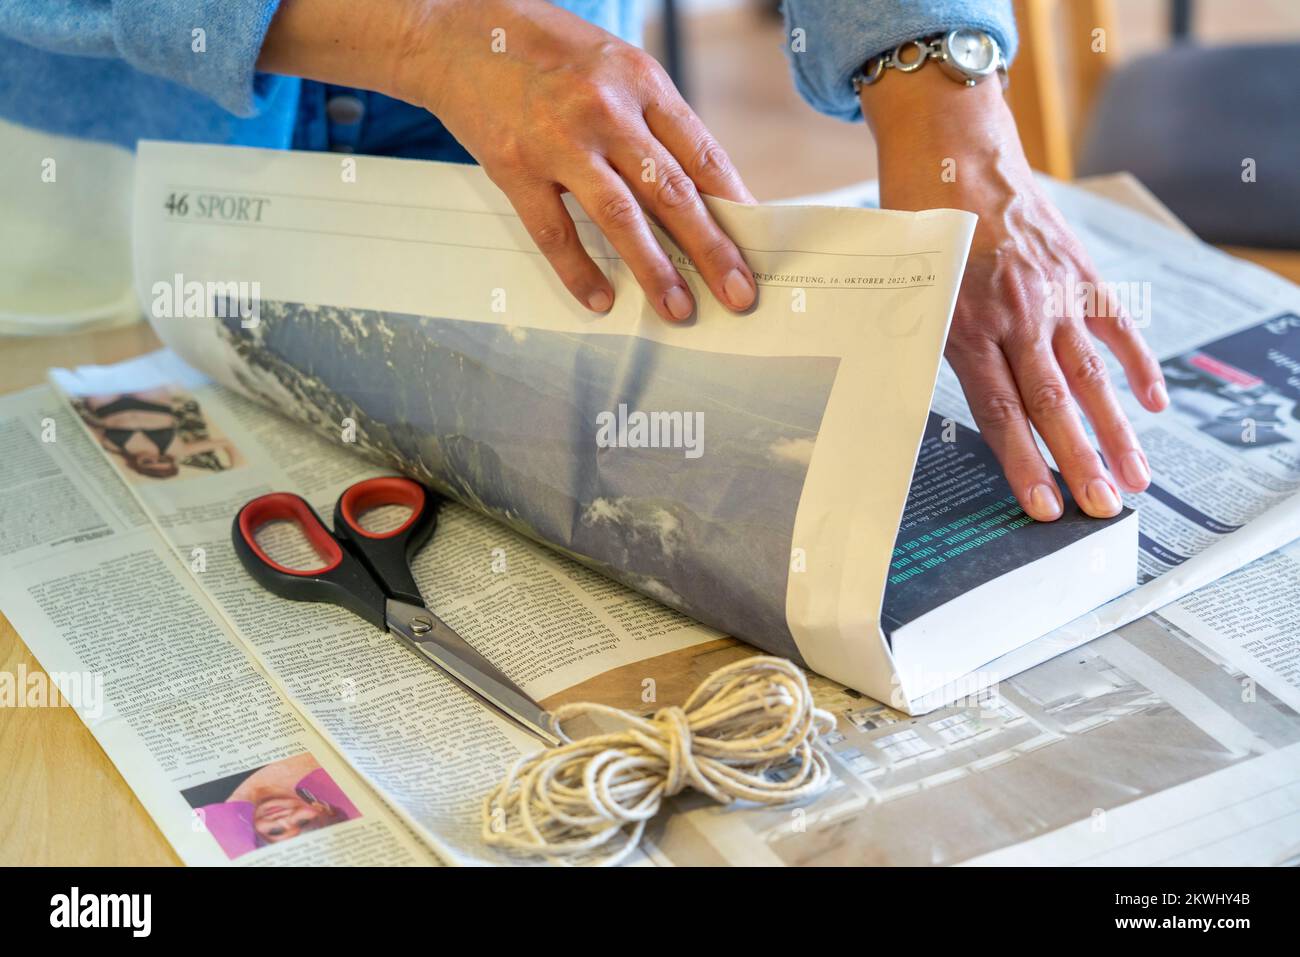 https://c8.alamy.com/comp/2KWHY4B/sustainable-gift-wrapping-in-newspaper-without-adhesive-tape-just-tied-up-with-cord-2KWHY4B.jpg